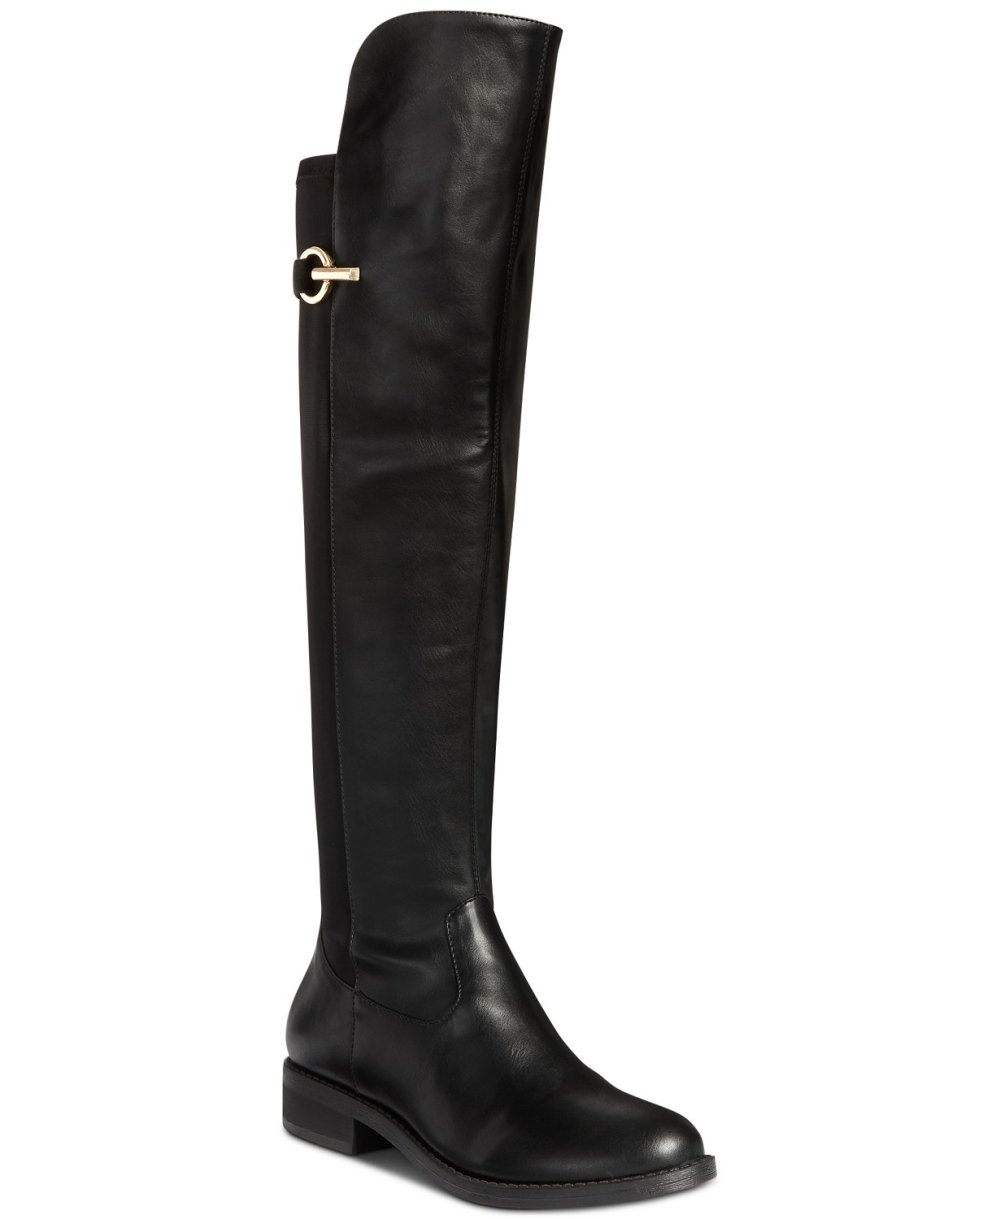 Score These Macy's Chic Over-the-Knee Boots for Just $30 | Us Weekly